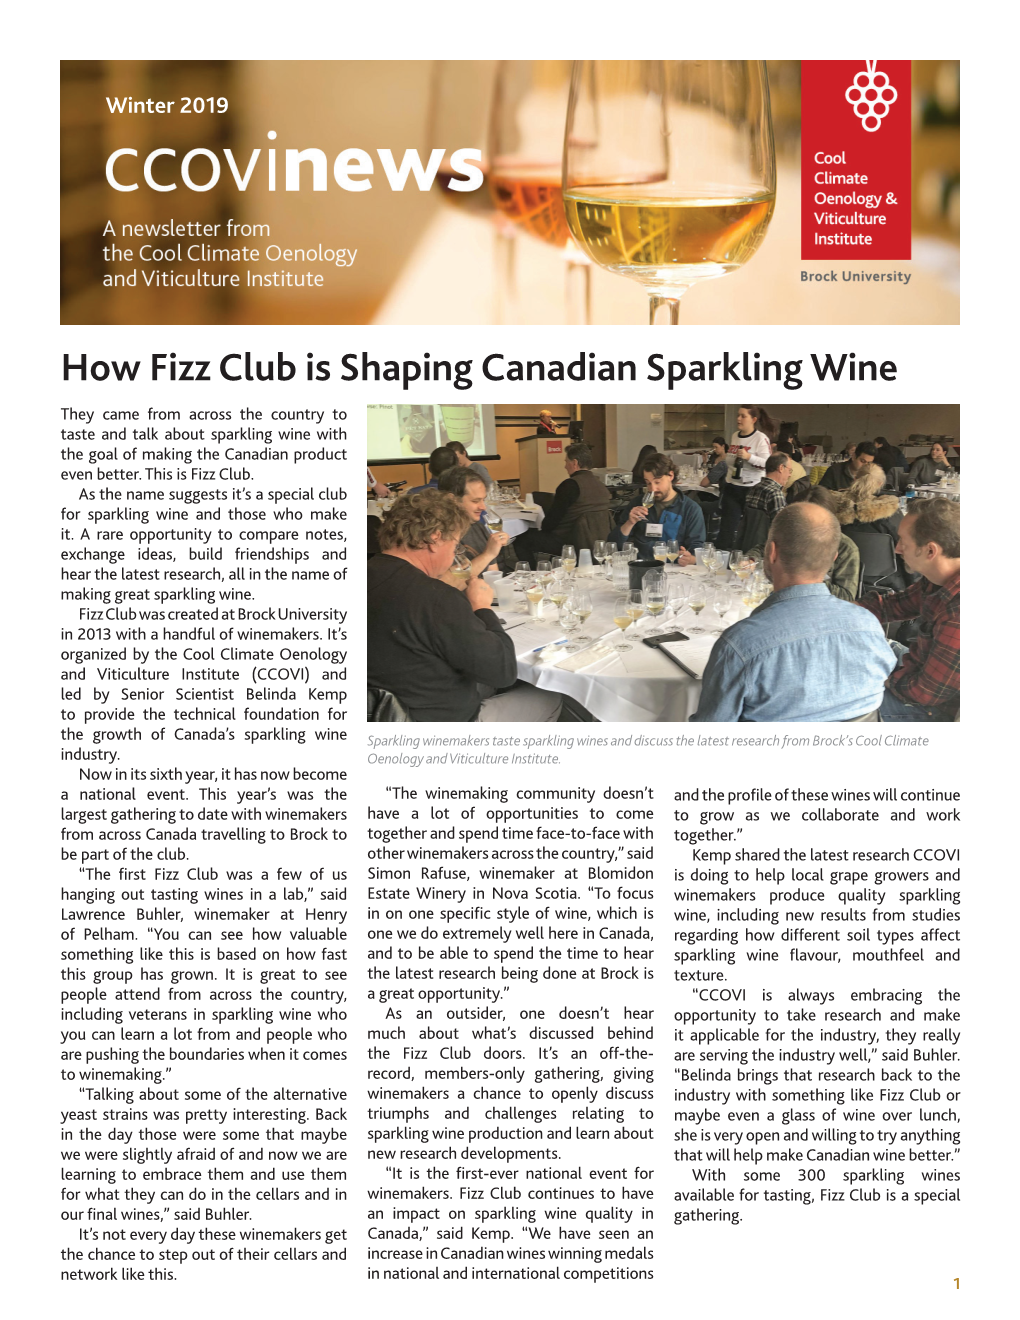 How Fizz Club Is Shaping Canadian Sparkling Wine